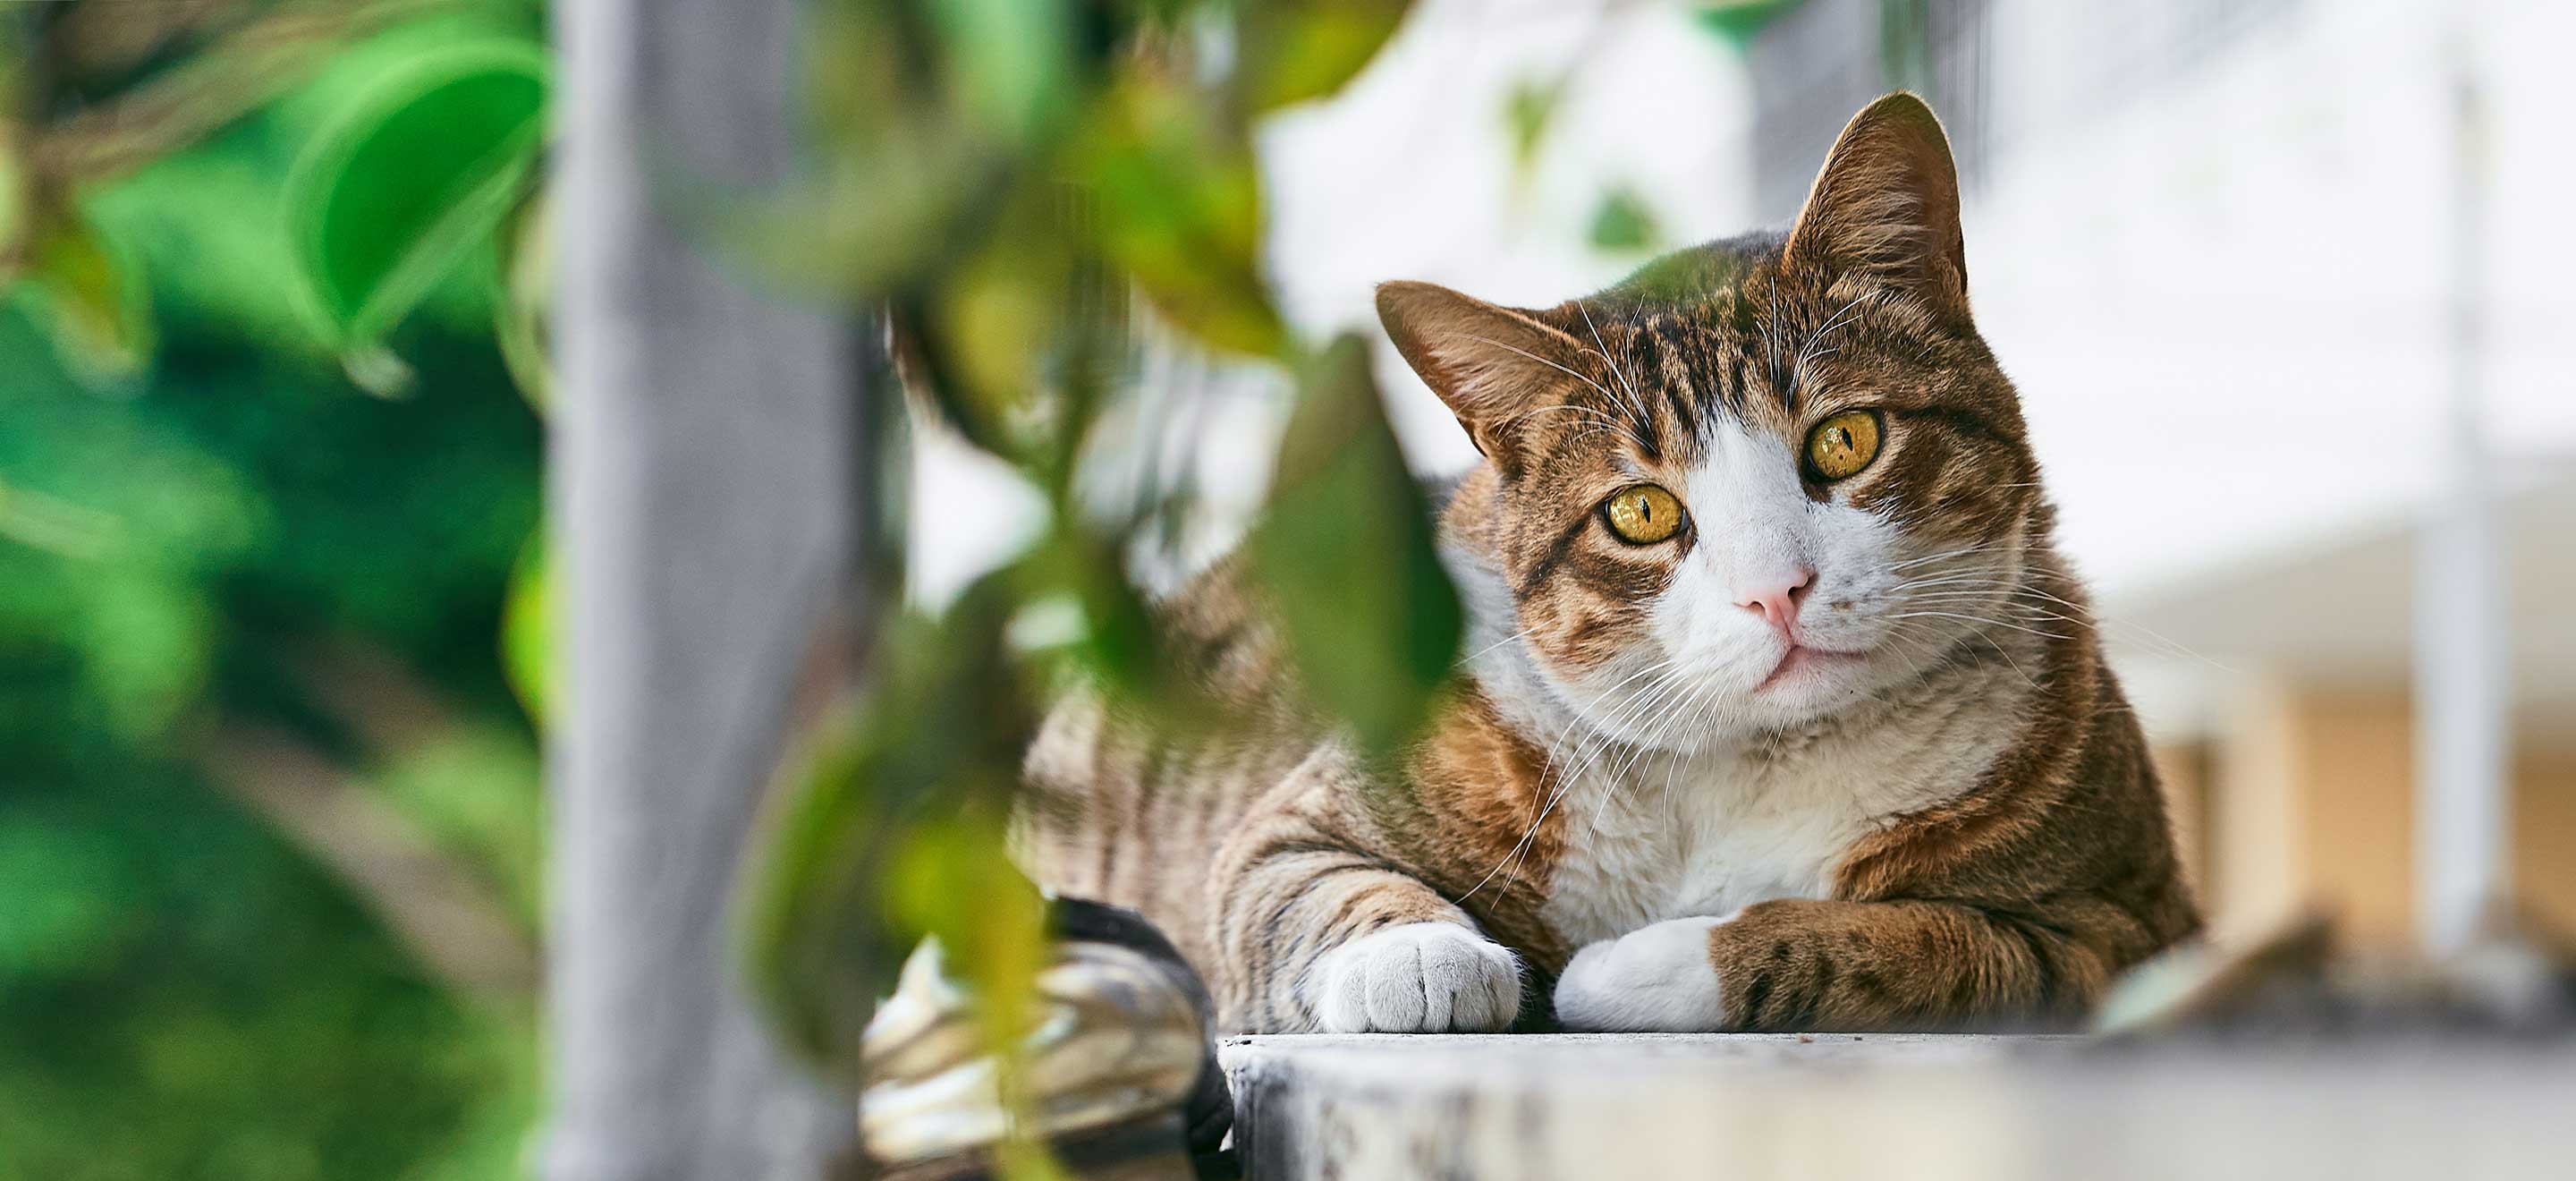 Brown and white tabby cat near vines image